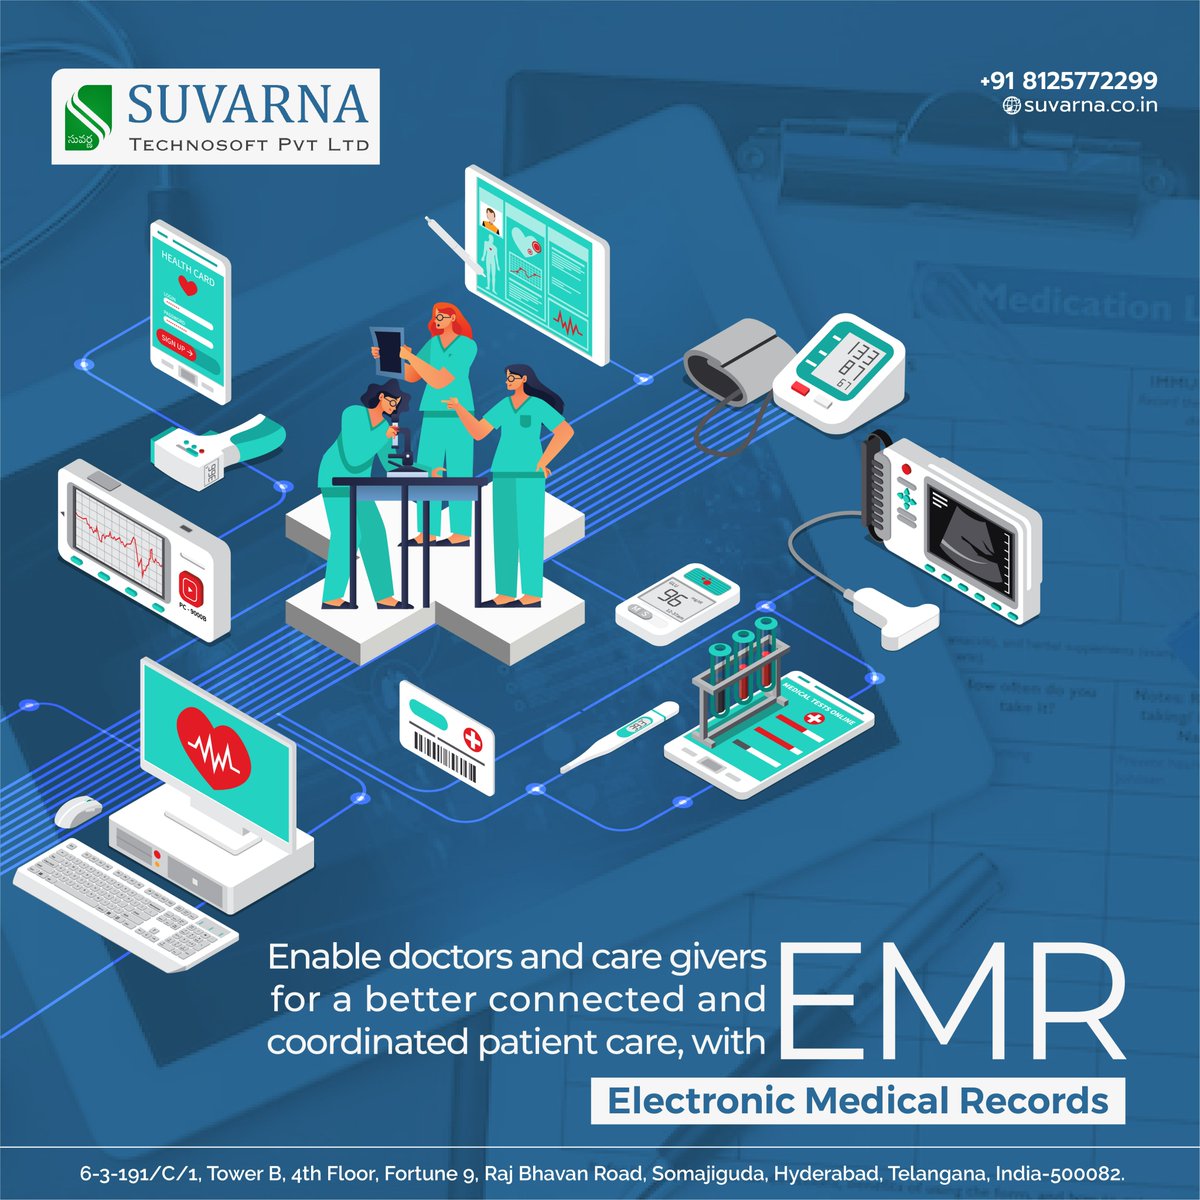 Get ready to transform patient care with our user-friendly EMR software. Enhance clinical efficiency with seamless digital documentation and real-time collaboration.
.
.
#SuvarnaTechnosoft #EMRSoftware #DigitalHealthcare #ImprovedPatientCare #realtimecollaboration